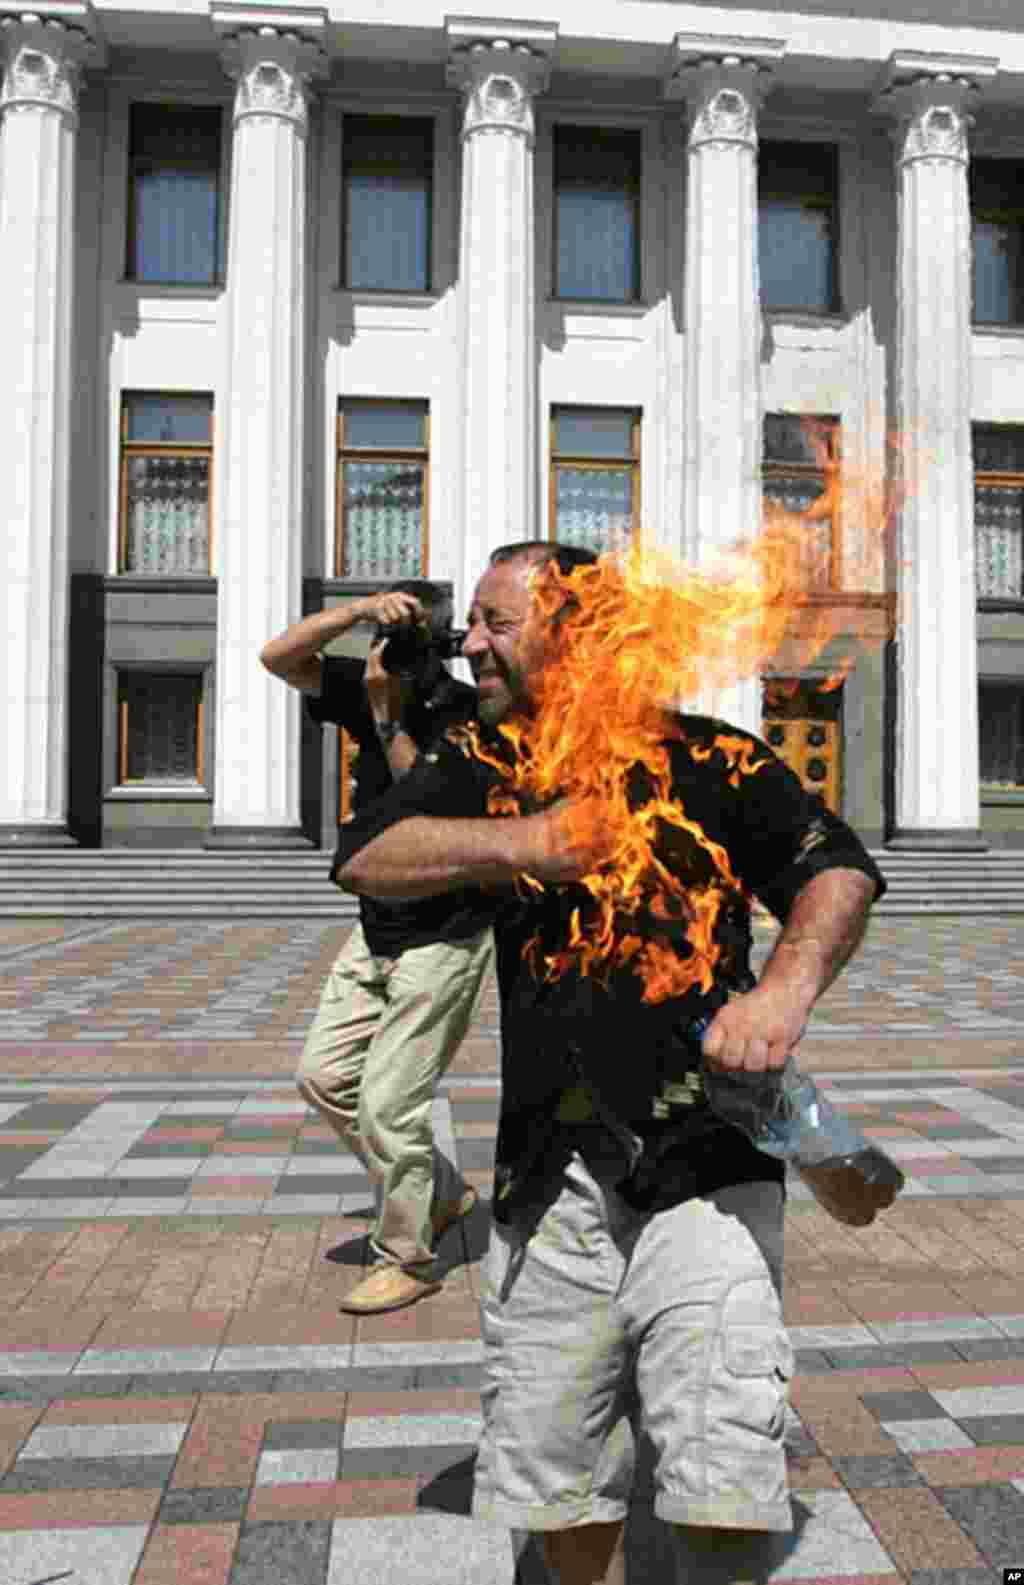 Maksim Lyashenko sets himself on fire in front of Ukraine's parliament in Kiev. The 50-year old businessman from Kherson region in southern Ukraine has been demonstrating in front of parliament for a week, demanding the resignation of the governor in his 